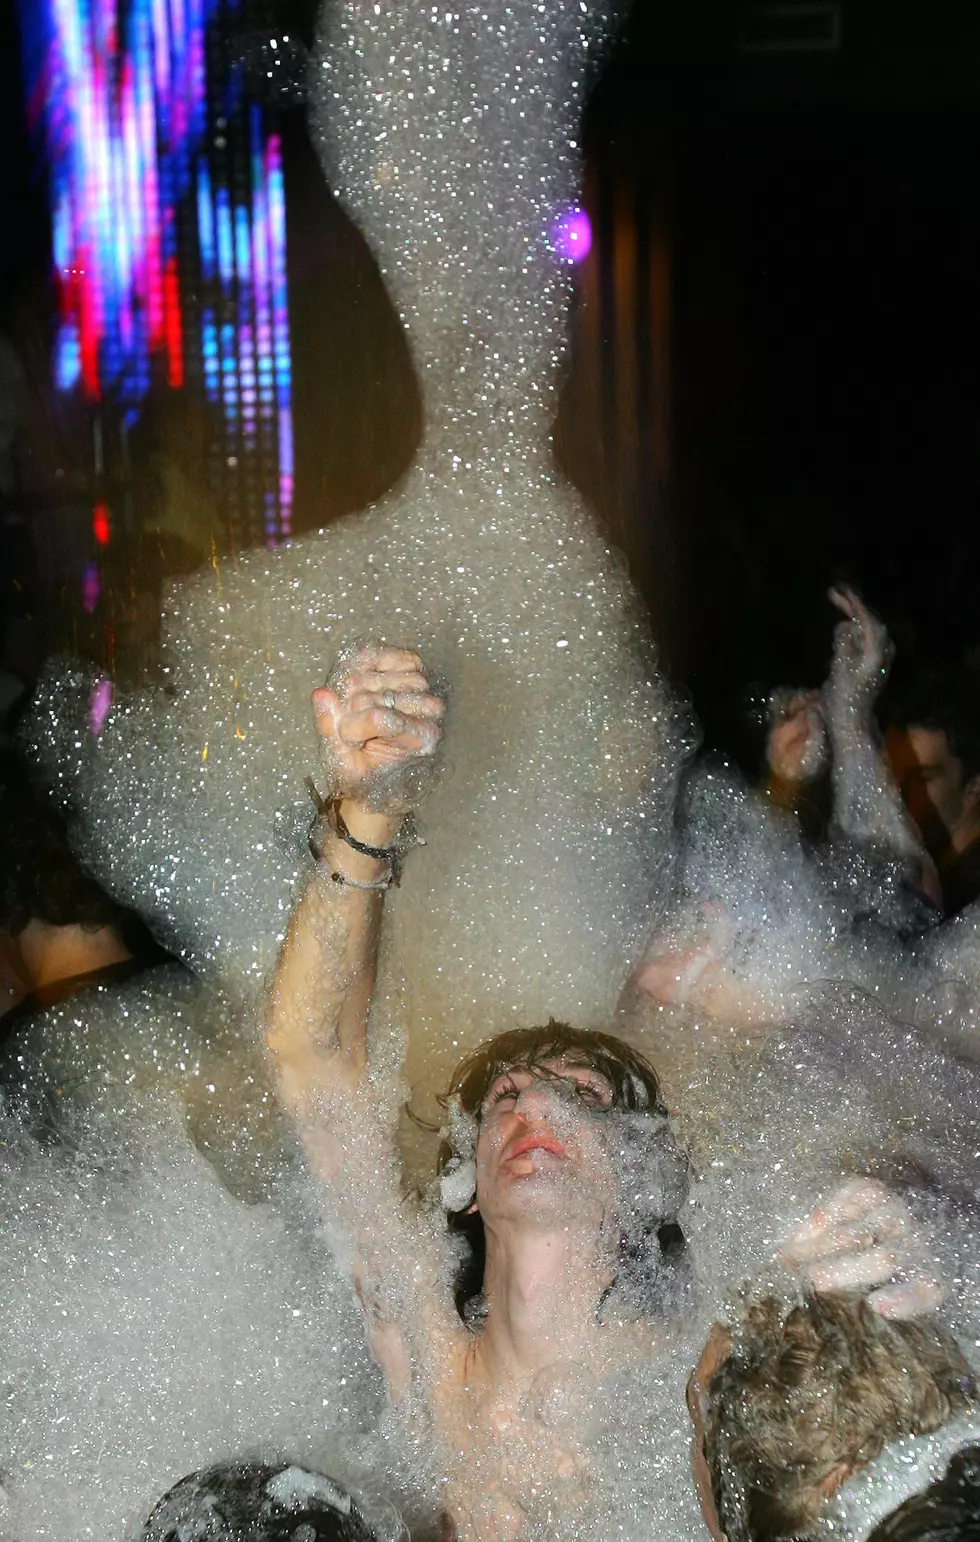 An Old Dude&#8217;s Thoughts on Foam Parties